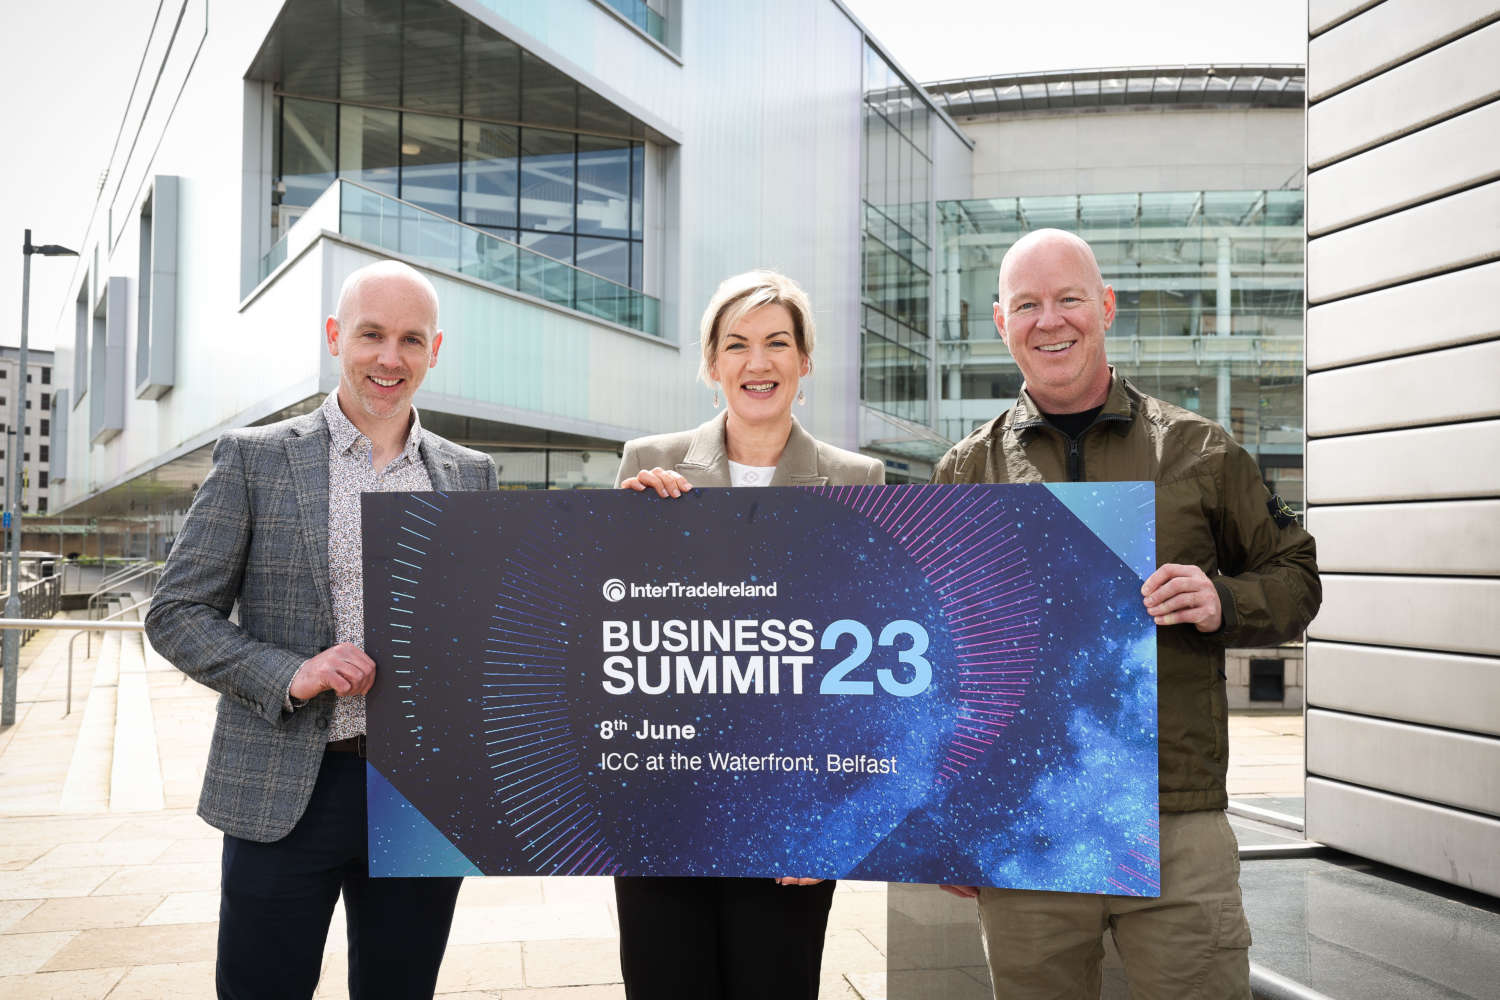 Margaret Hearty, CEO InterTradeIreland (centre) with Sean Dobbs, CEO Forged Innovation and Mark Dodds, CEO Responsible